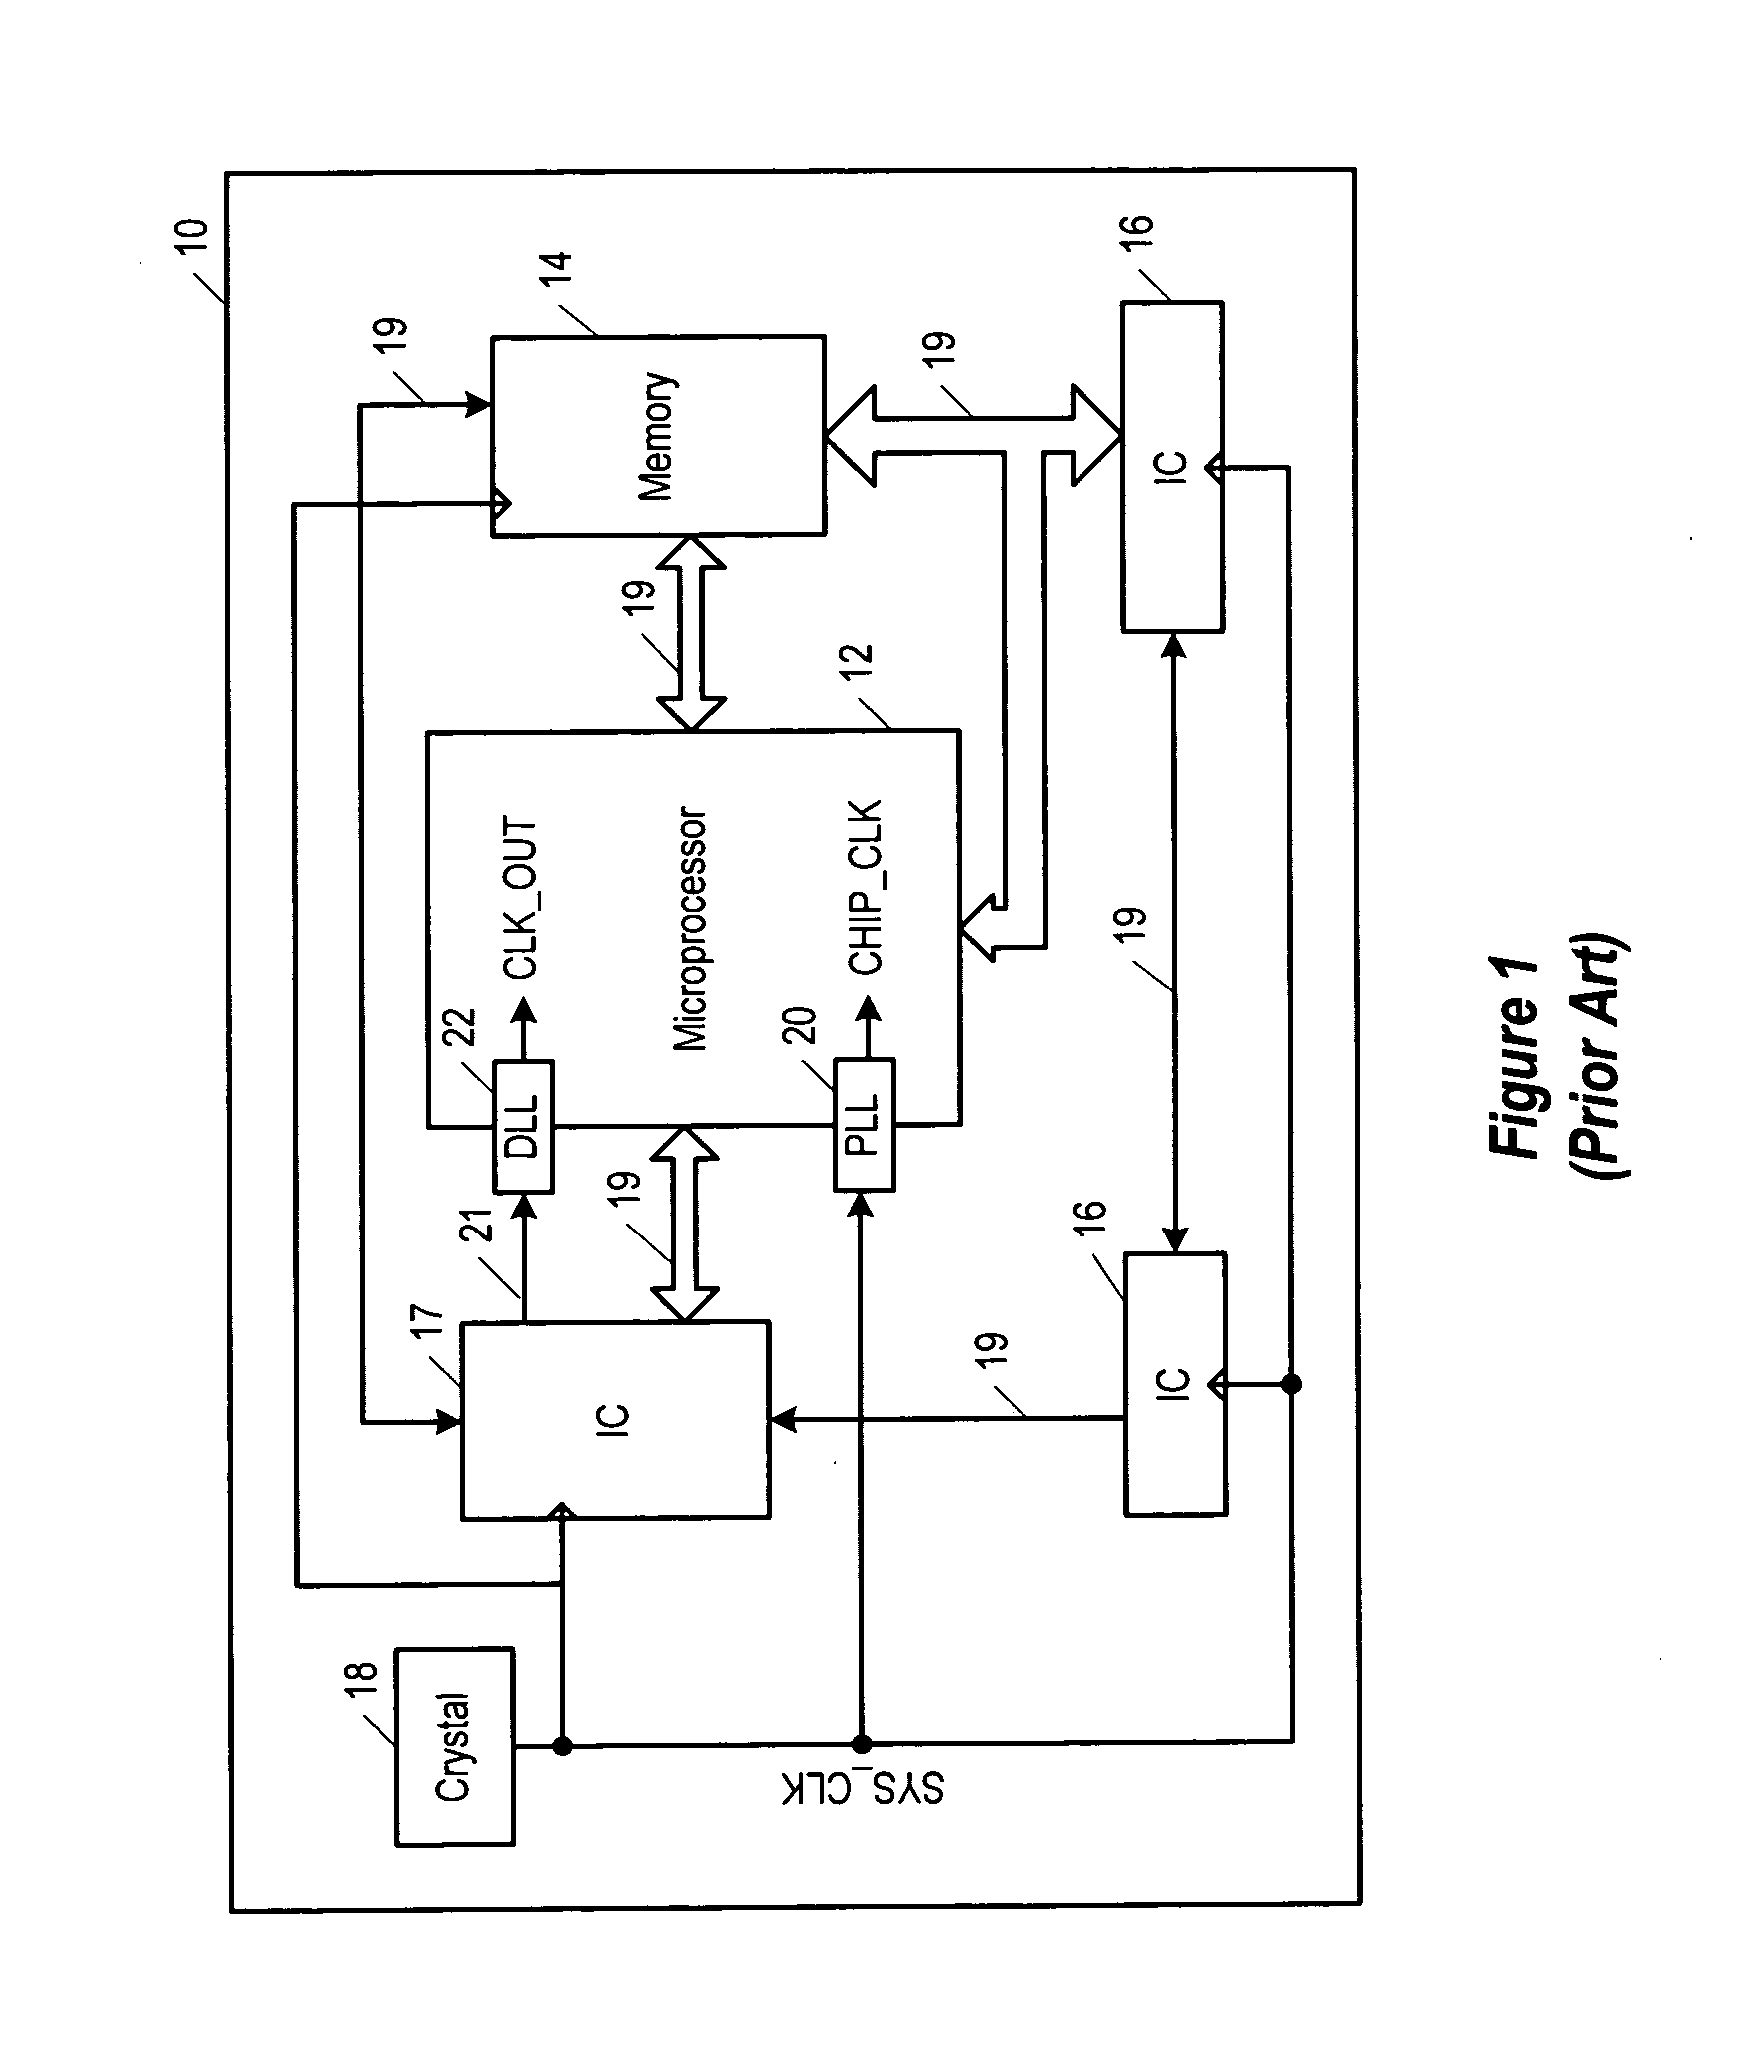 Compensation technique to mitigate aging effects in integrated circuit components